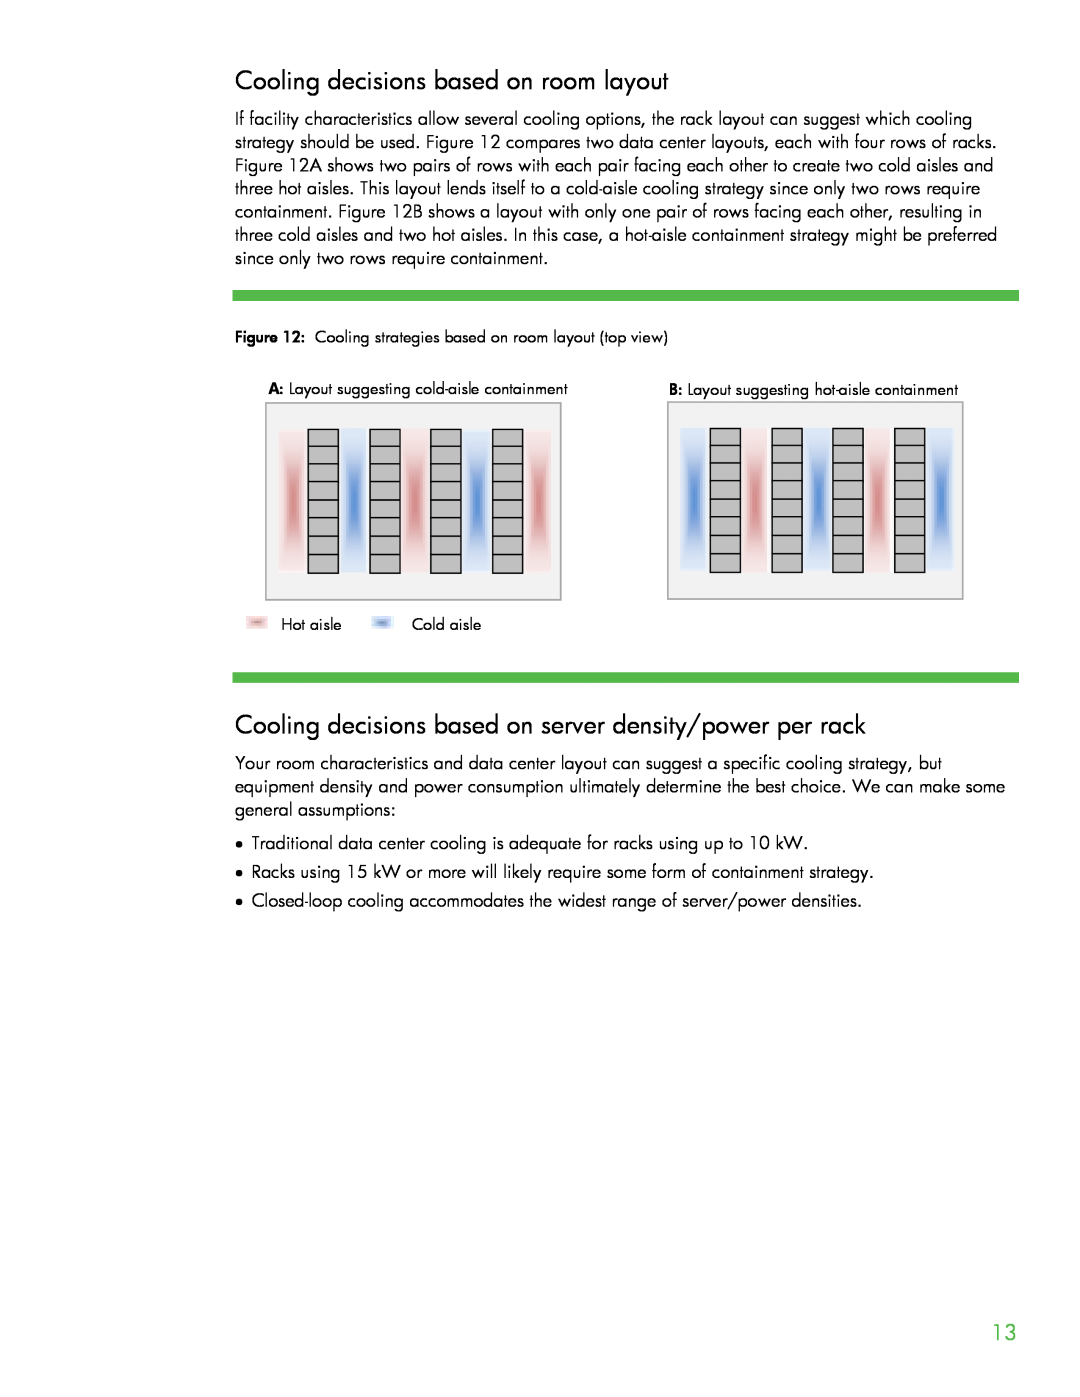 HP Modular Cooling System Cooling decisions based on room layout, Cooling decisions based on server density/power per rack 